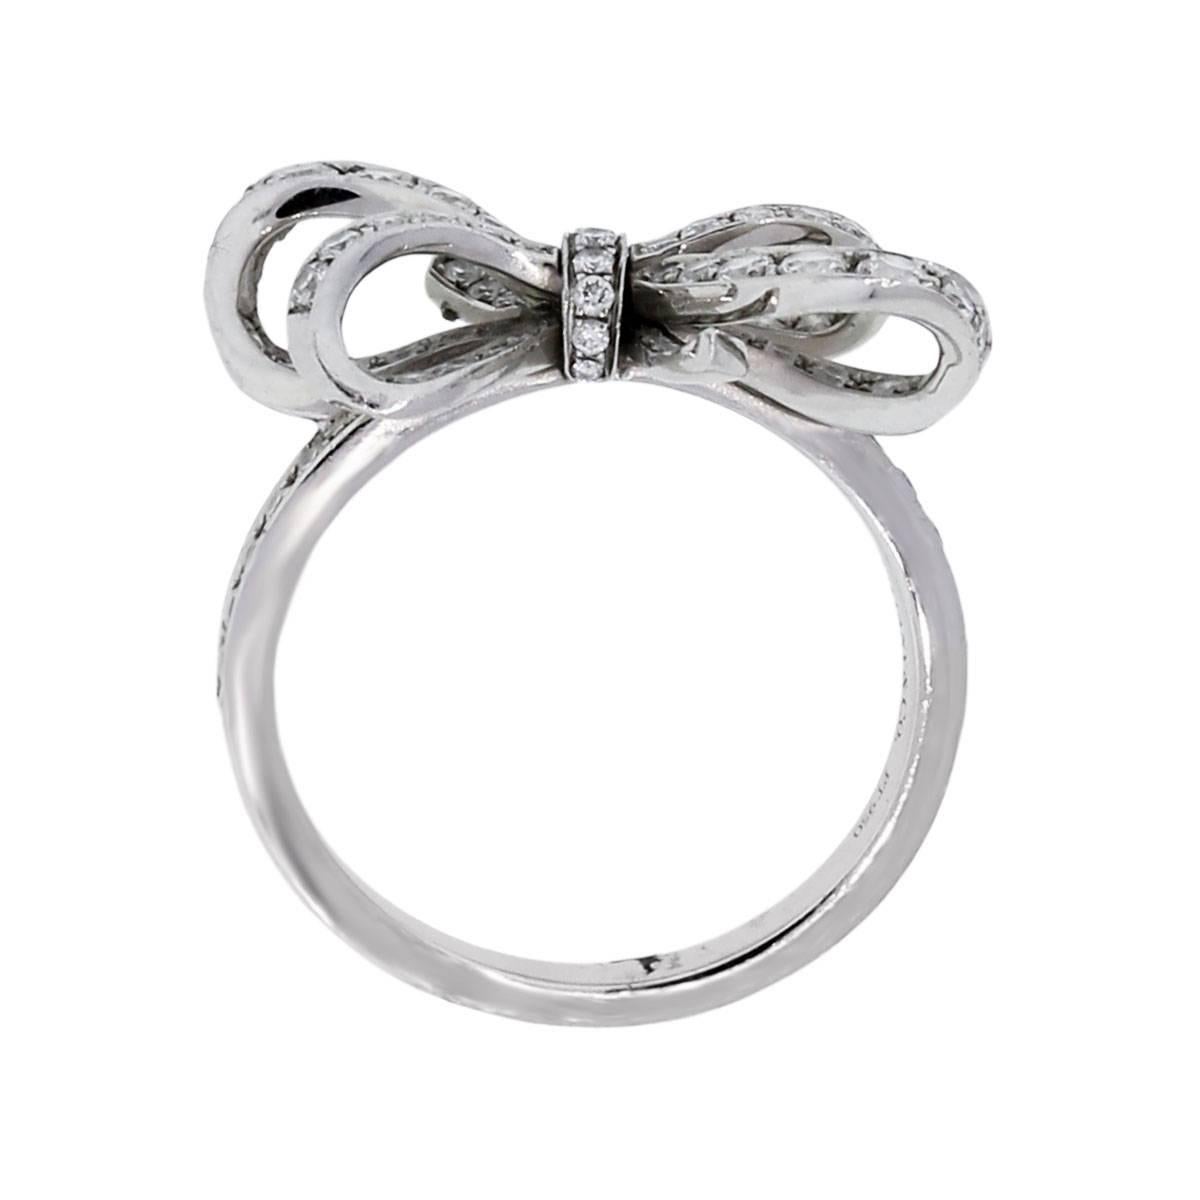 Brand: Tiffany & Co.
Material: Platinum
Diamond Details: Approximately 0.51ctw of Round Brilliant Diamonds. Diamonds are E-F in color and VS in clarity.
Ring Size: 5.50
Ring Measurements: 0.87